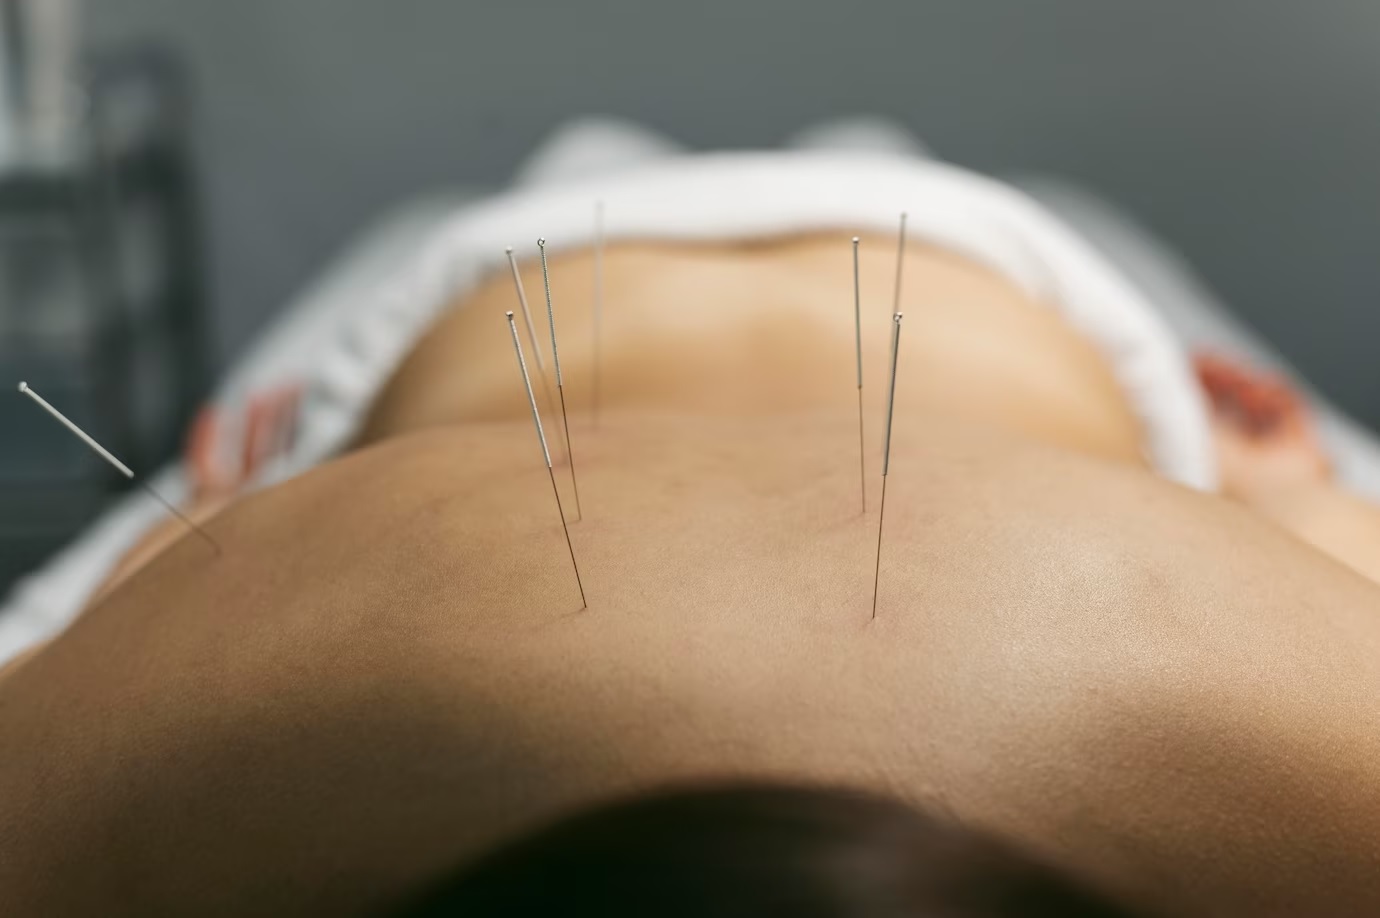 Dry-Needling:-9-Things-You-Need-to-Consider-Before-Trying-It